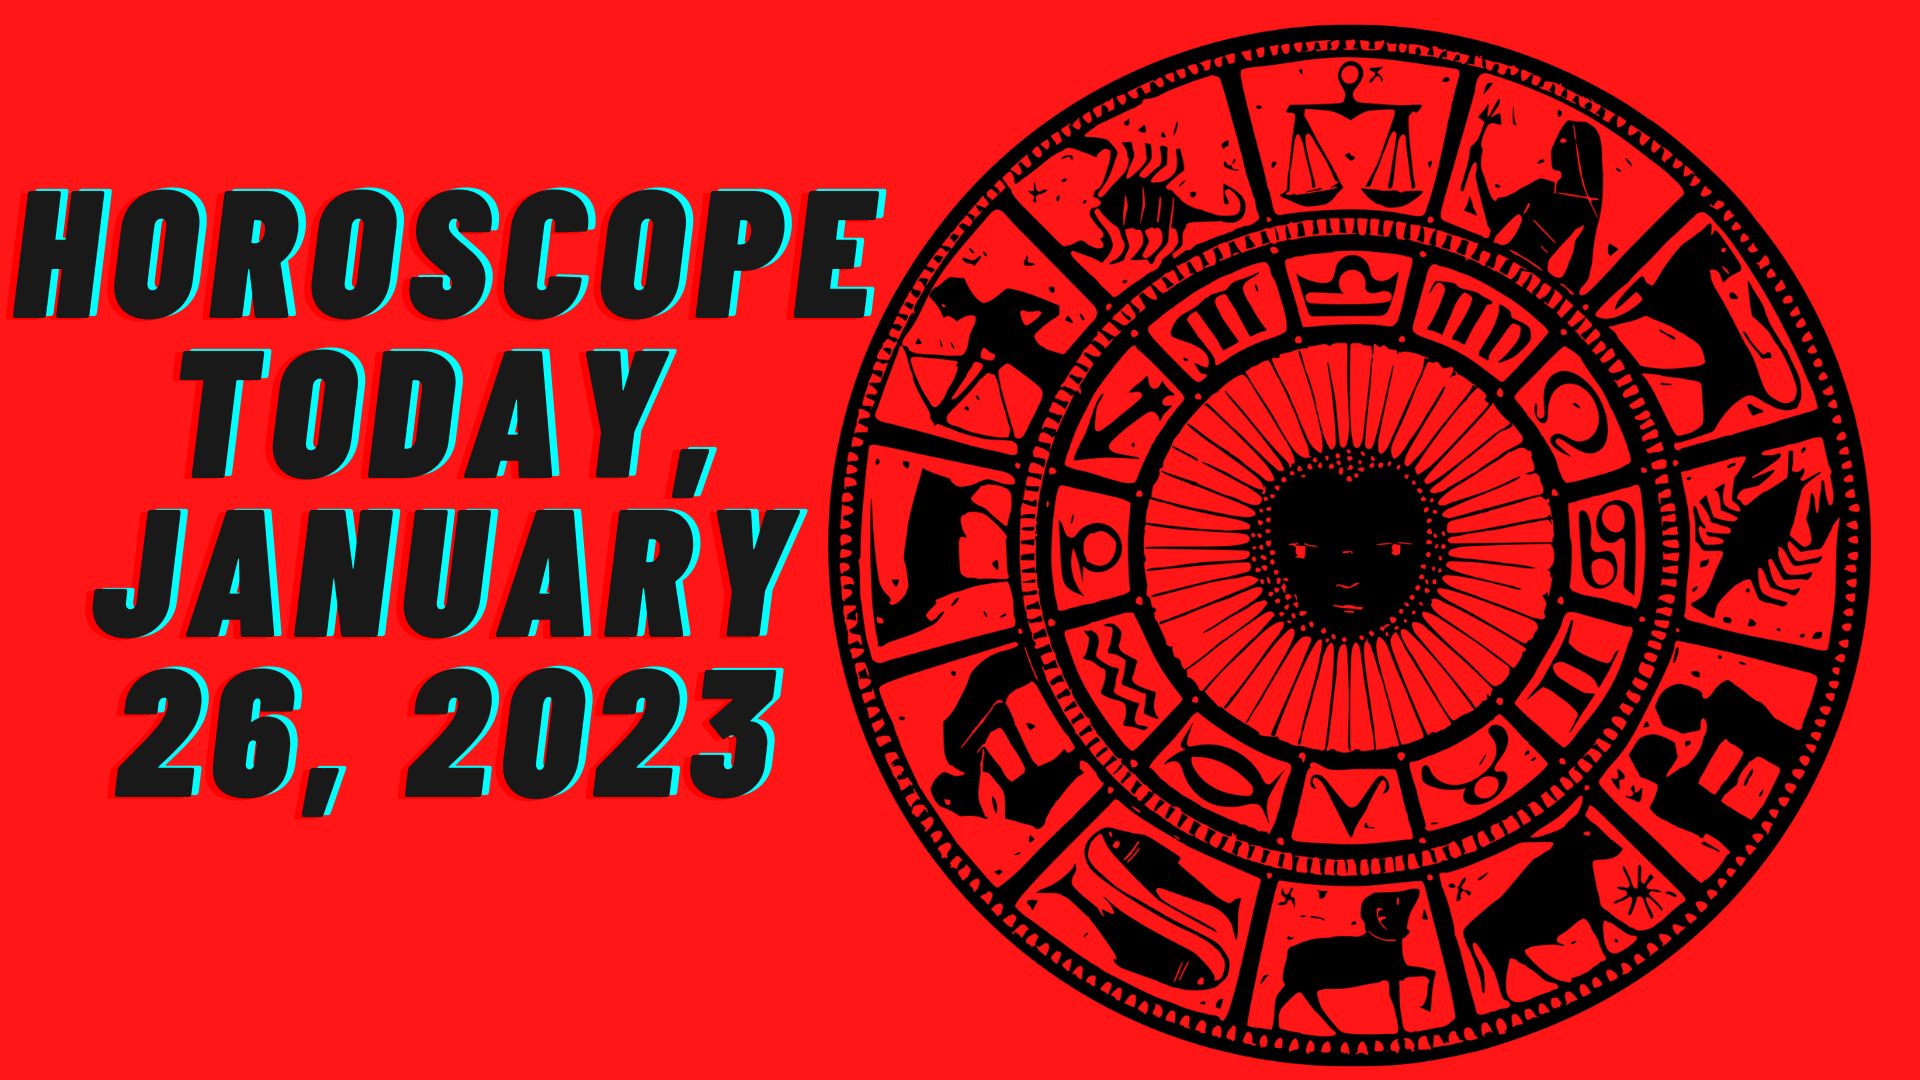 Horoscope Today, January 26, 2023 - Read Daily Astrological Predictions For All Zodiac Signs